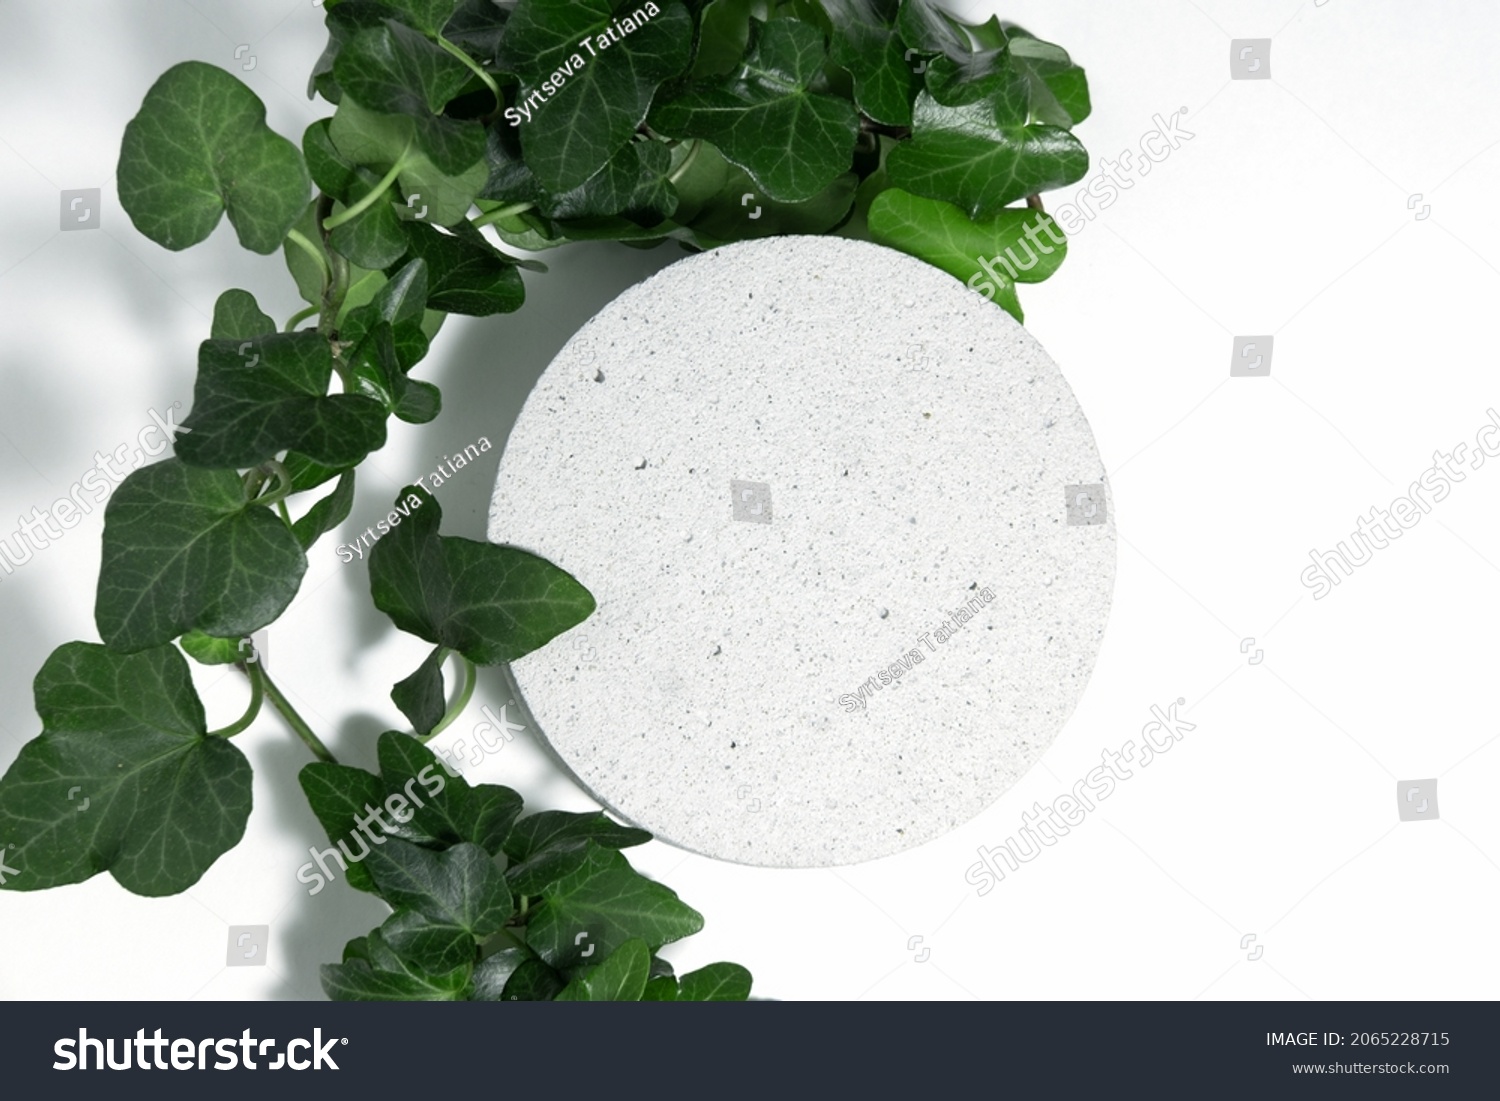 A podium made of concrete with green leaves of an ivy plant for the presentation of packaging and cosmetics, top view, on a white background. Product display with white concrete stone texture #2065228715